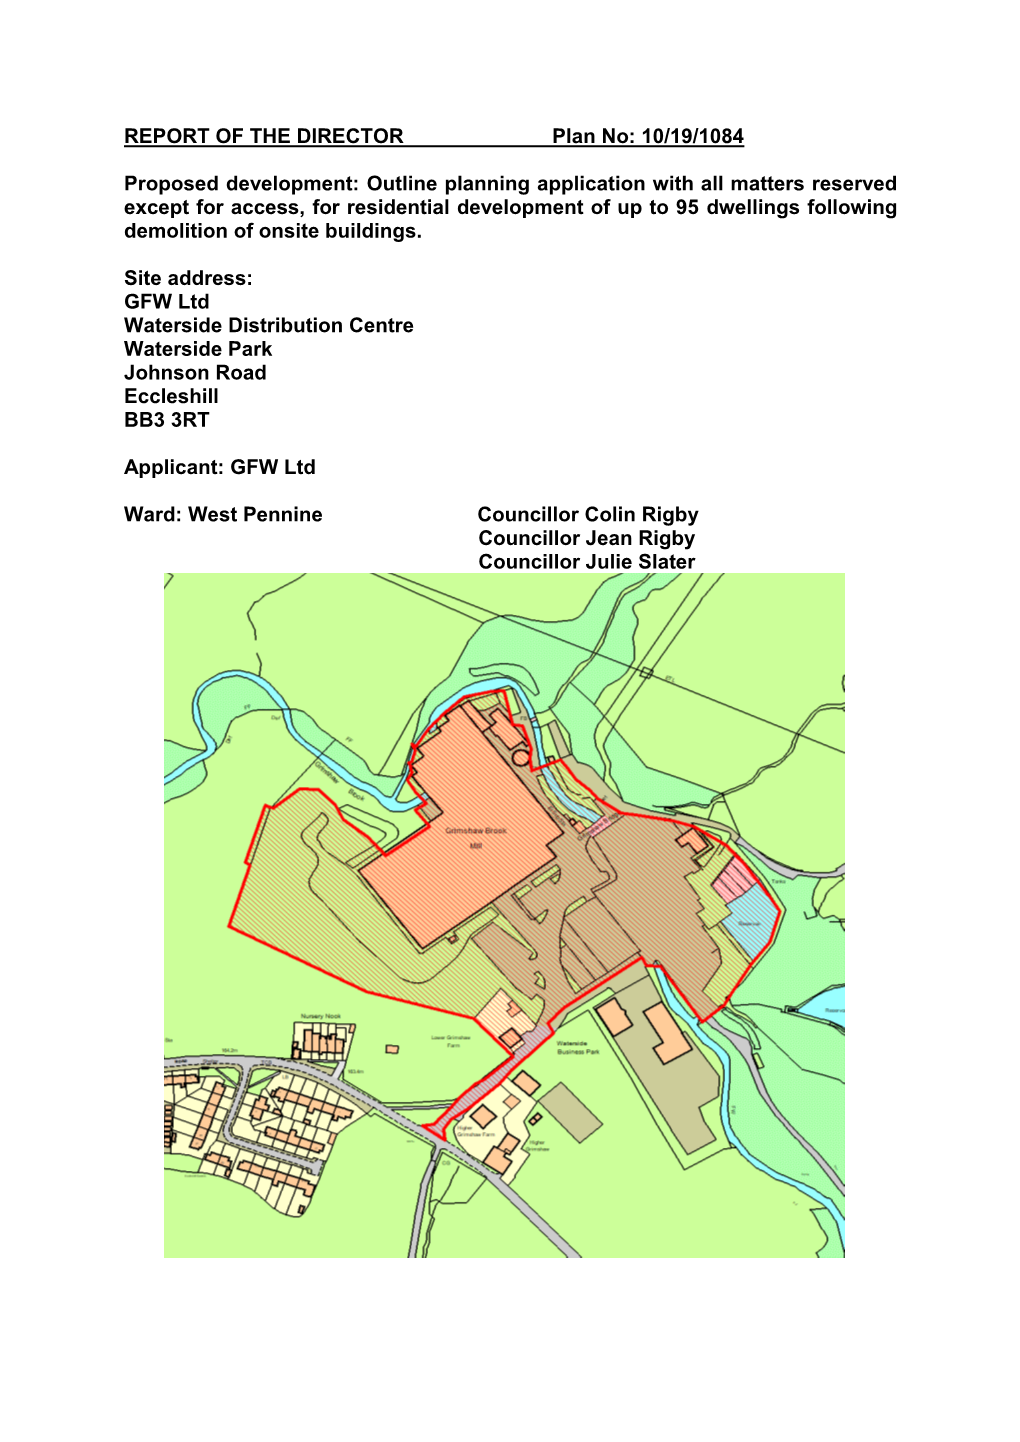 Outline Planning Application with All Matters Reserved Except for Access, for Residential Development of up to 95 Dwellings Following Demolition of Onsite Buildings